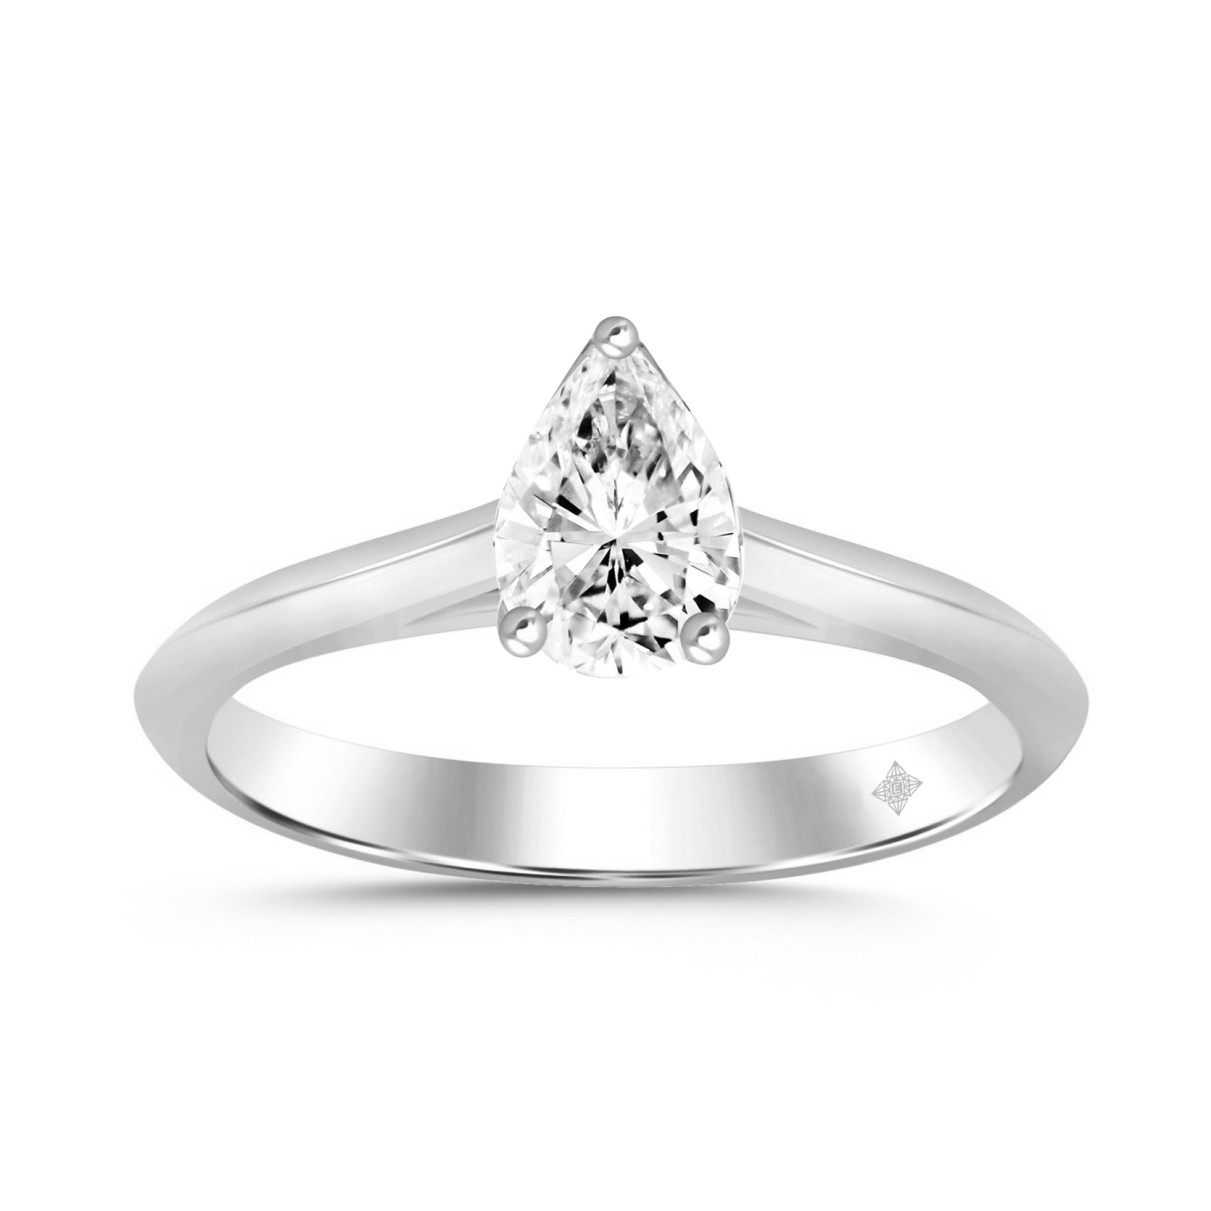 LADIES SOLITAIRE RING 2 1/2CT PEAR DIAMOND 14K WHITE GOLD 